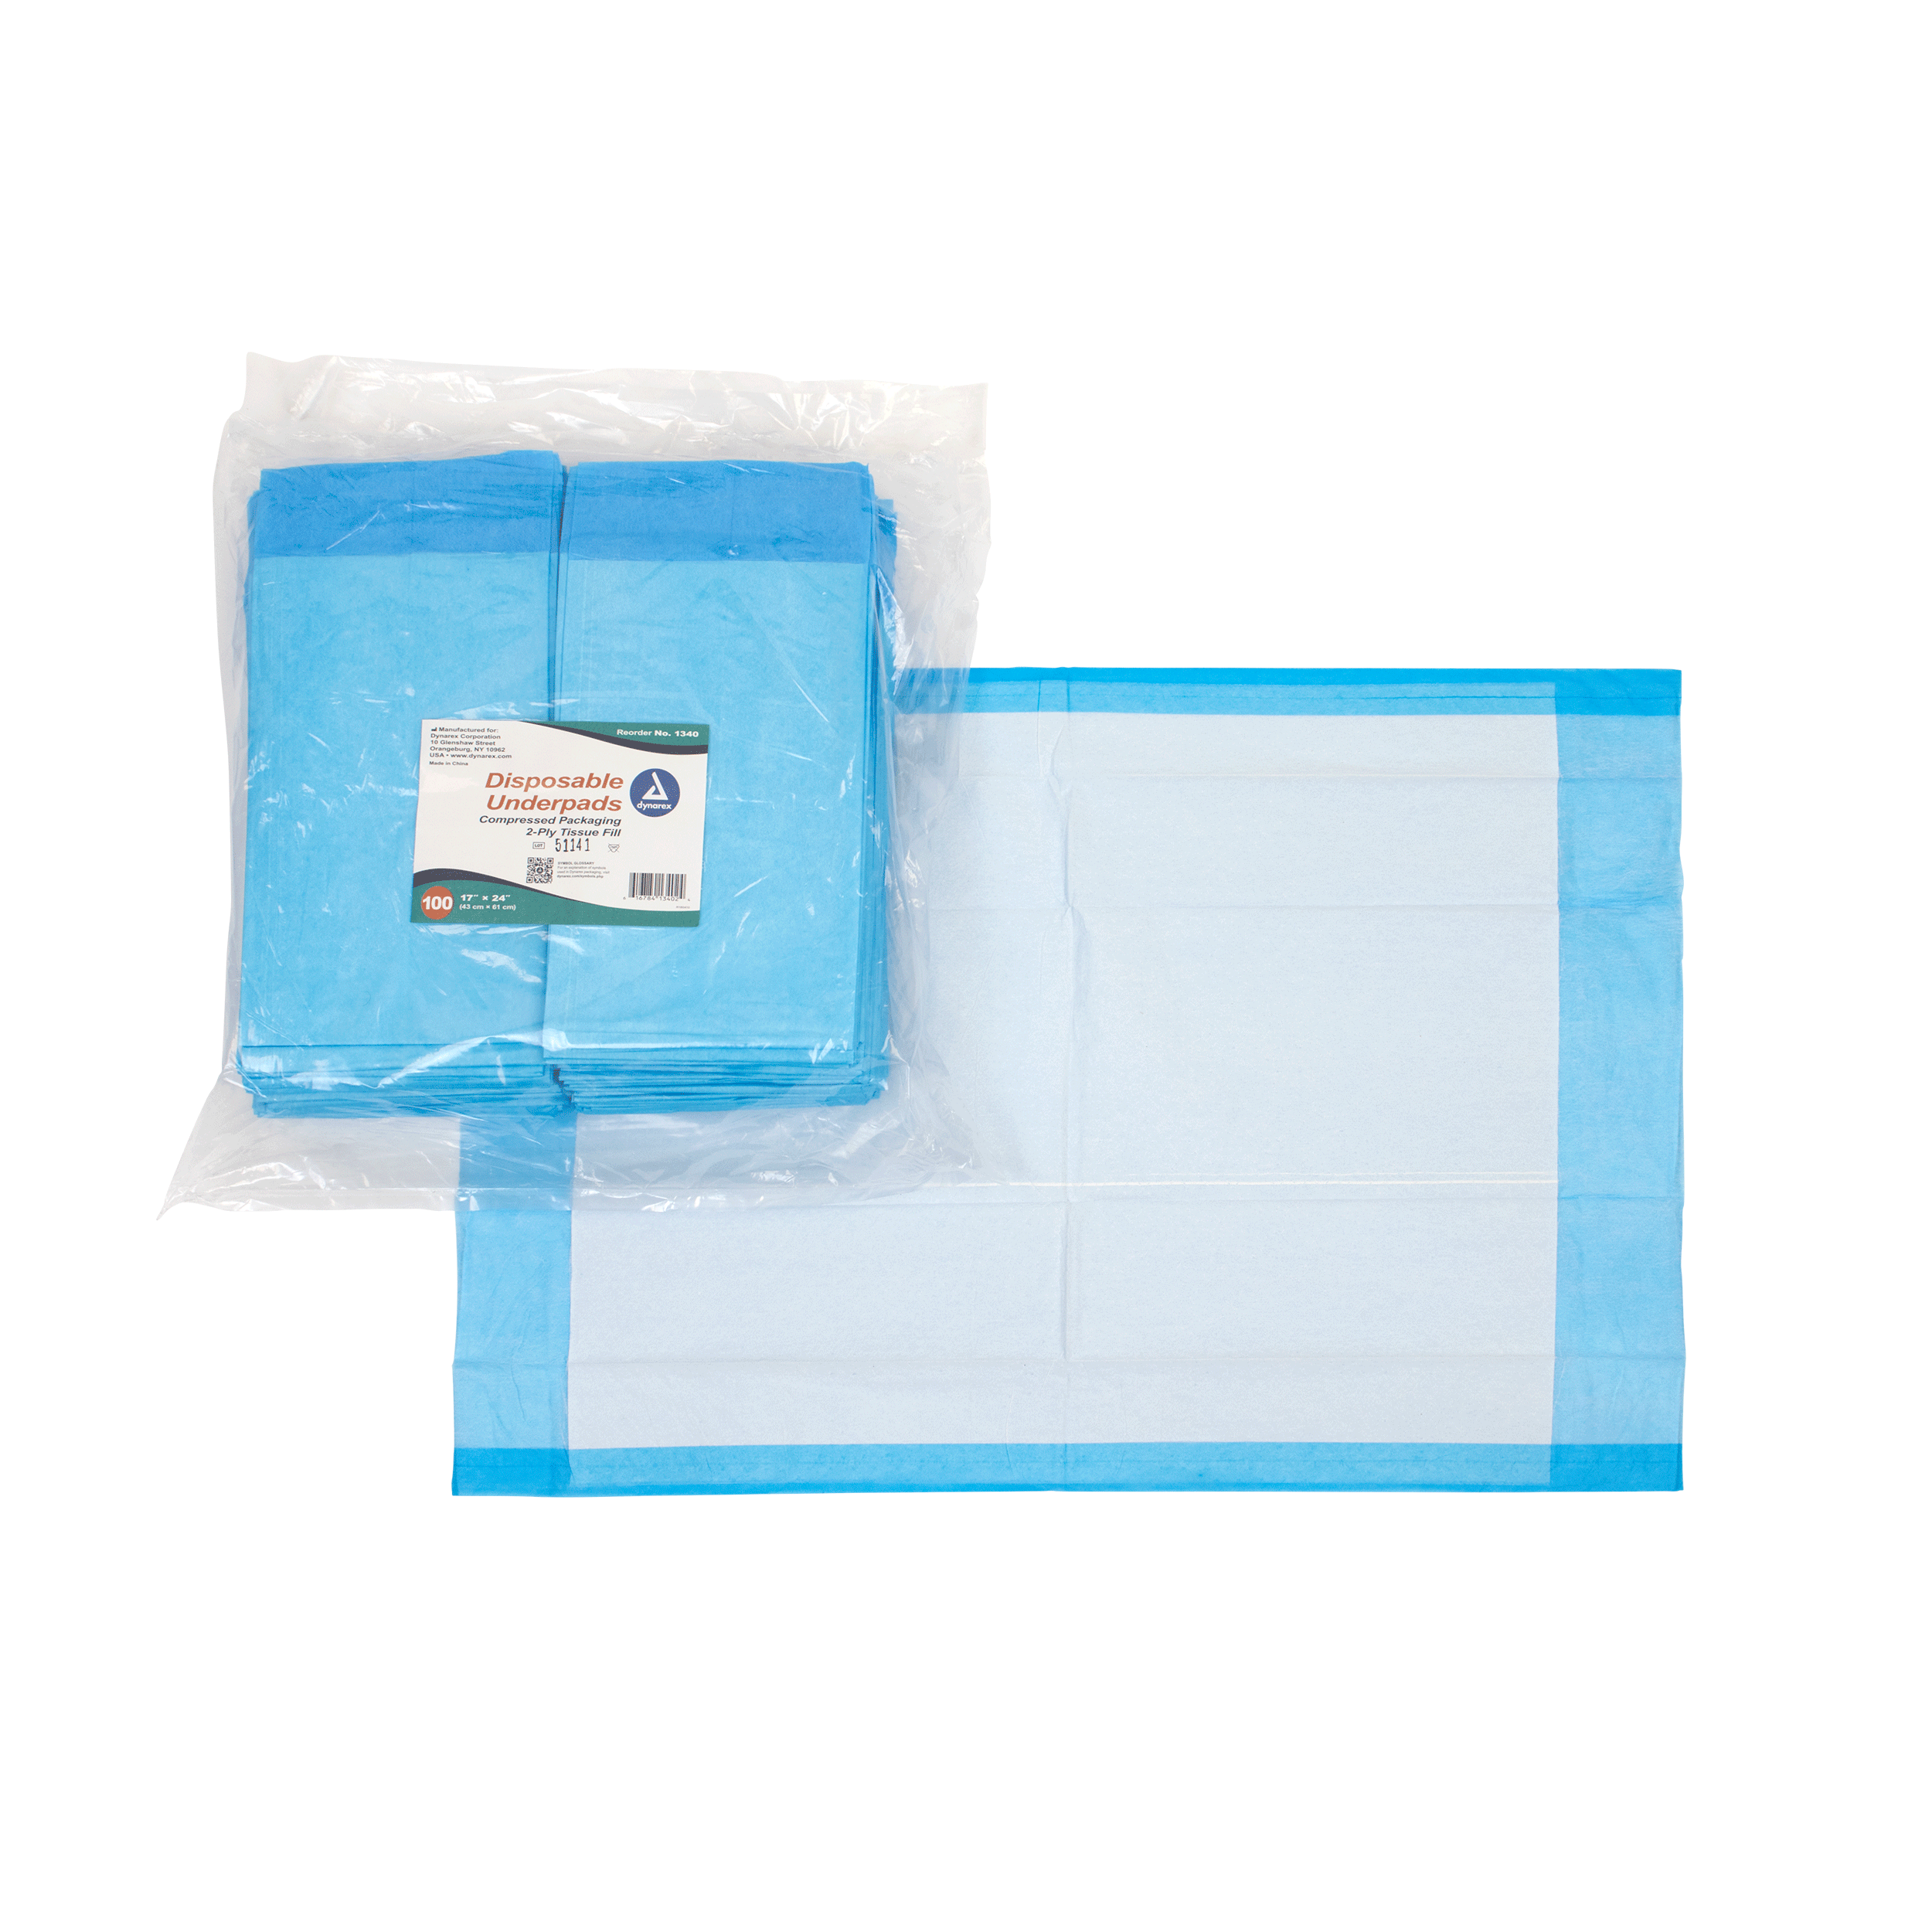 Disposable Underpads, 17 x 24 - Tissue Fill (2 ply)